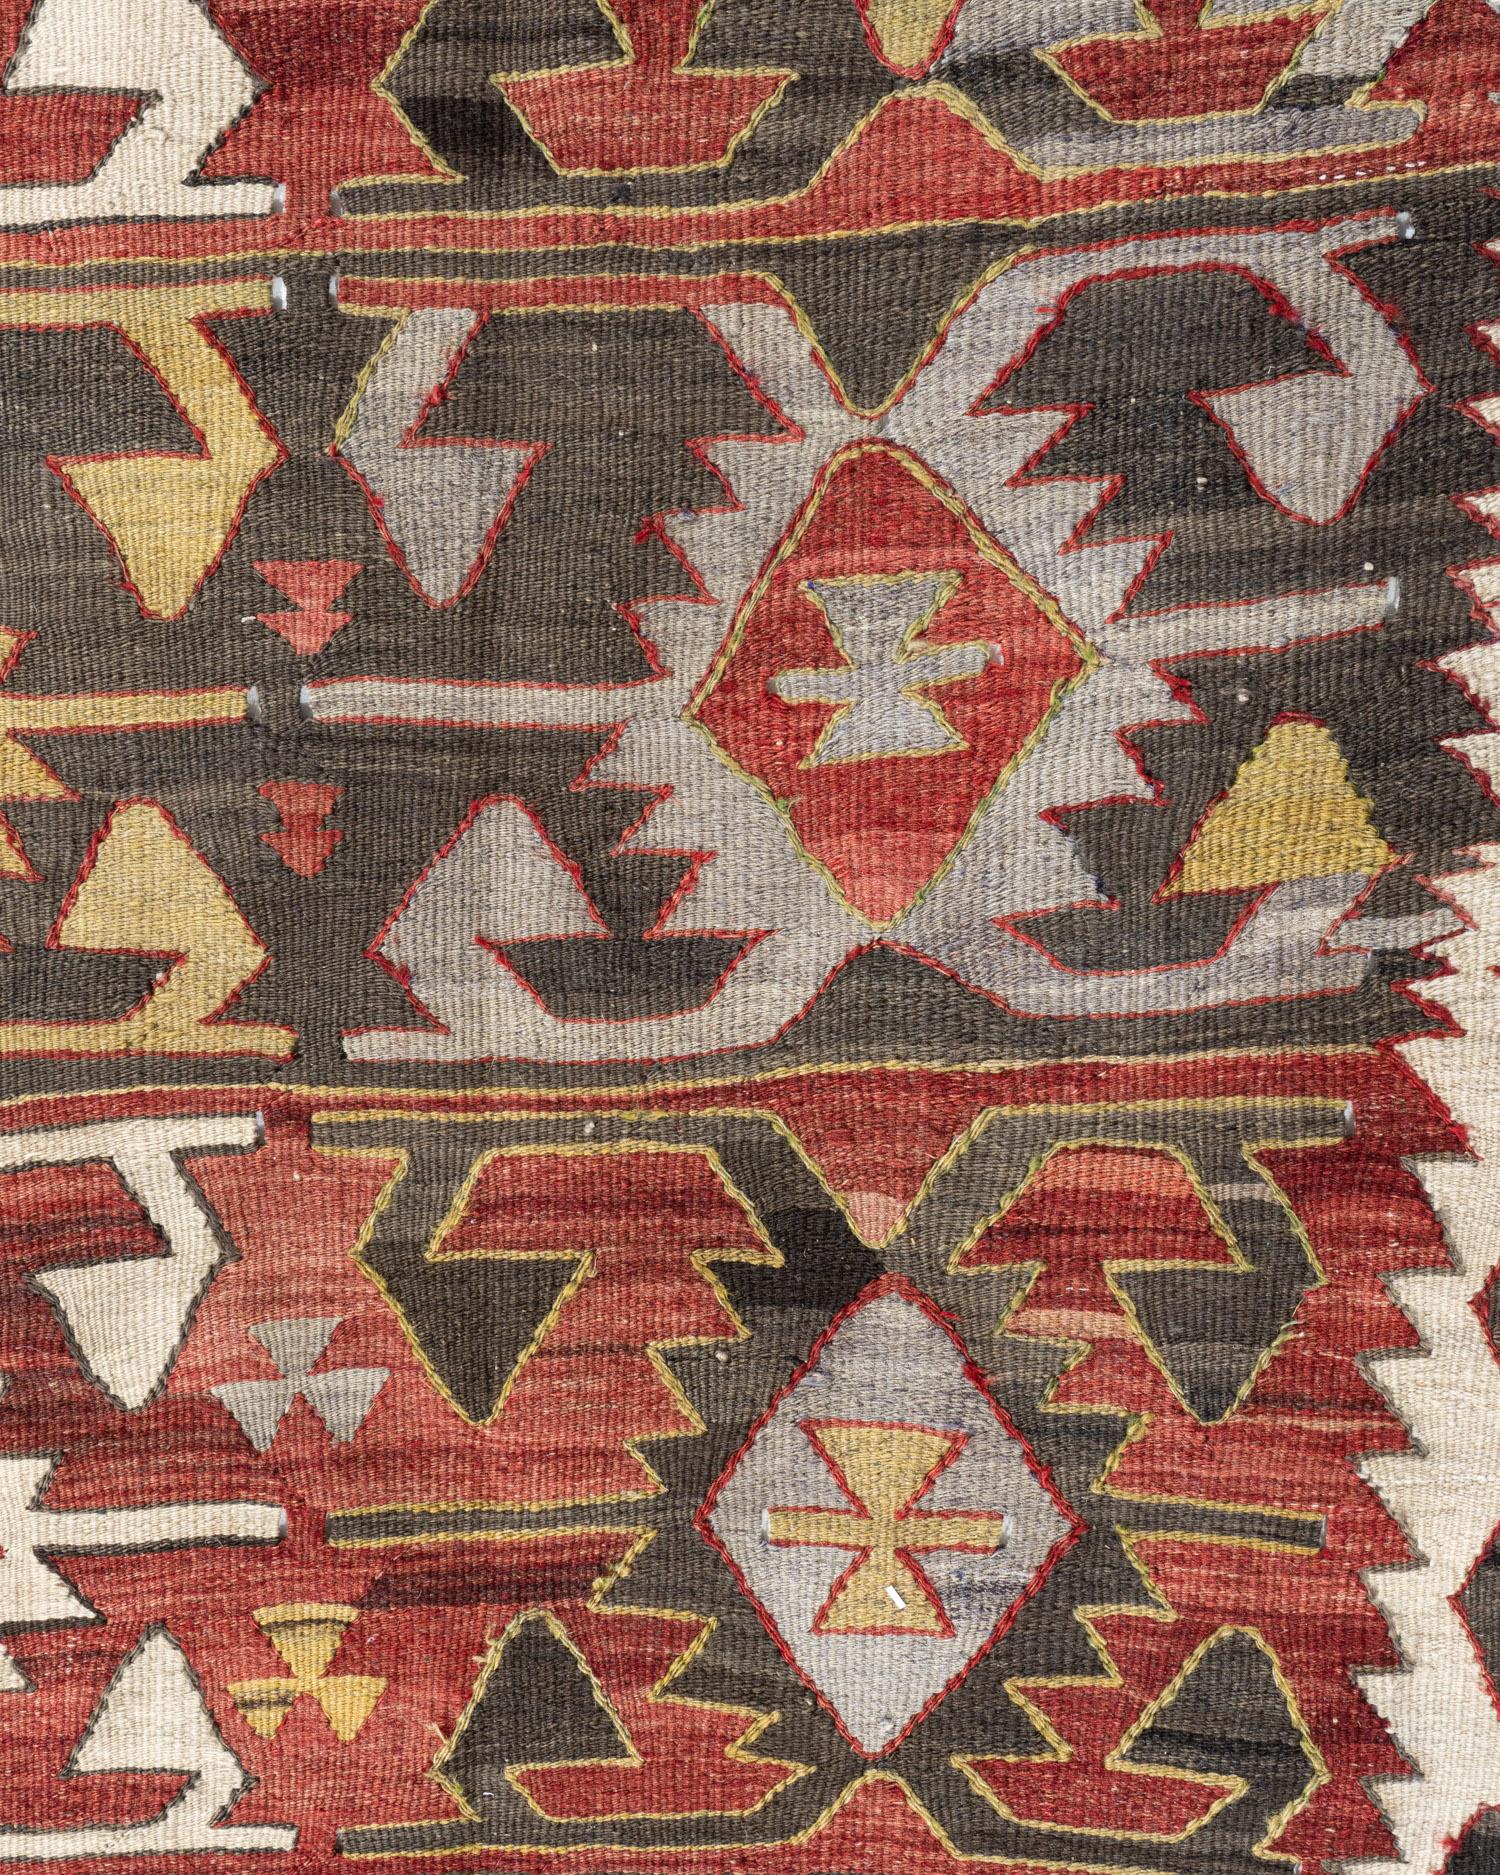 Vintage Cinnamon Turkish Kilim Area Rug  4'3 x 9'5 In Good Condition For Sale In New York, NY